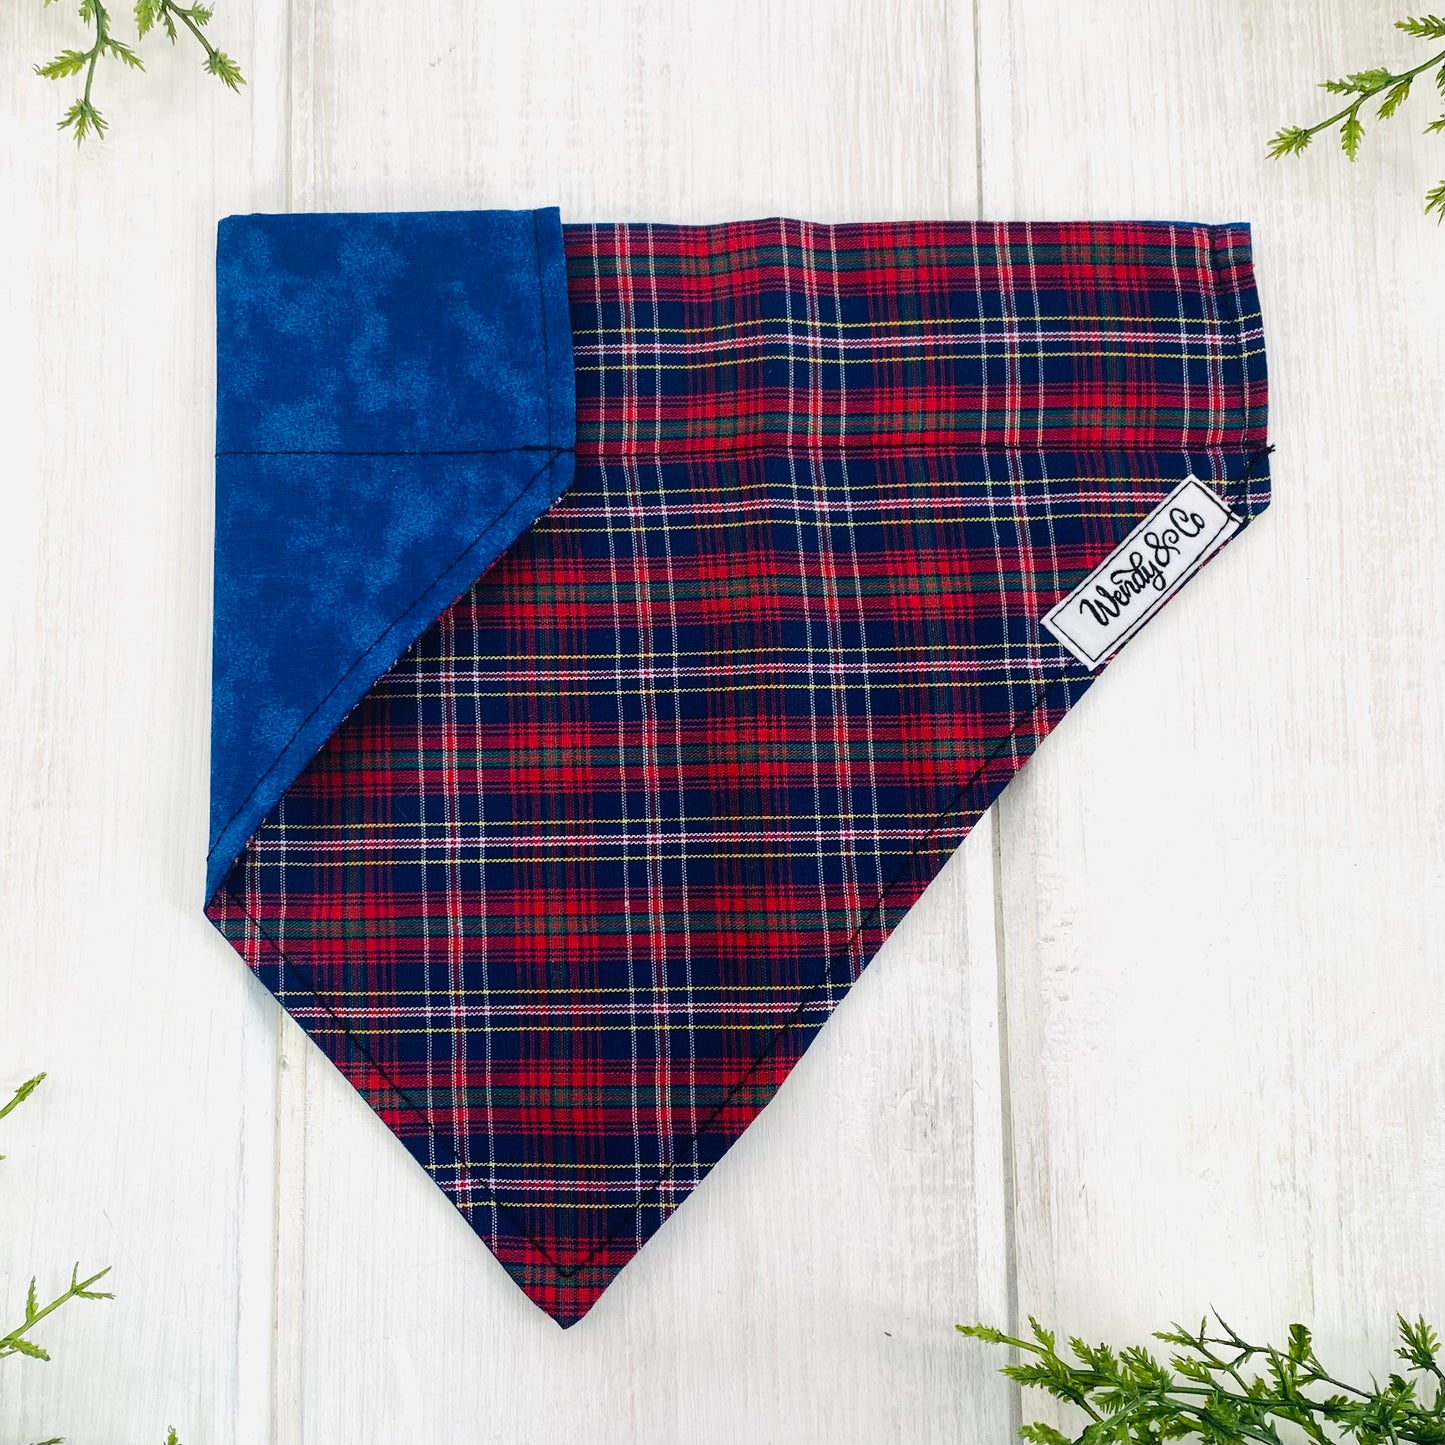 Tartan plaid navy and red dog bandana that slips over the collar.